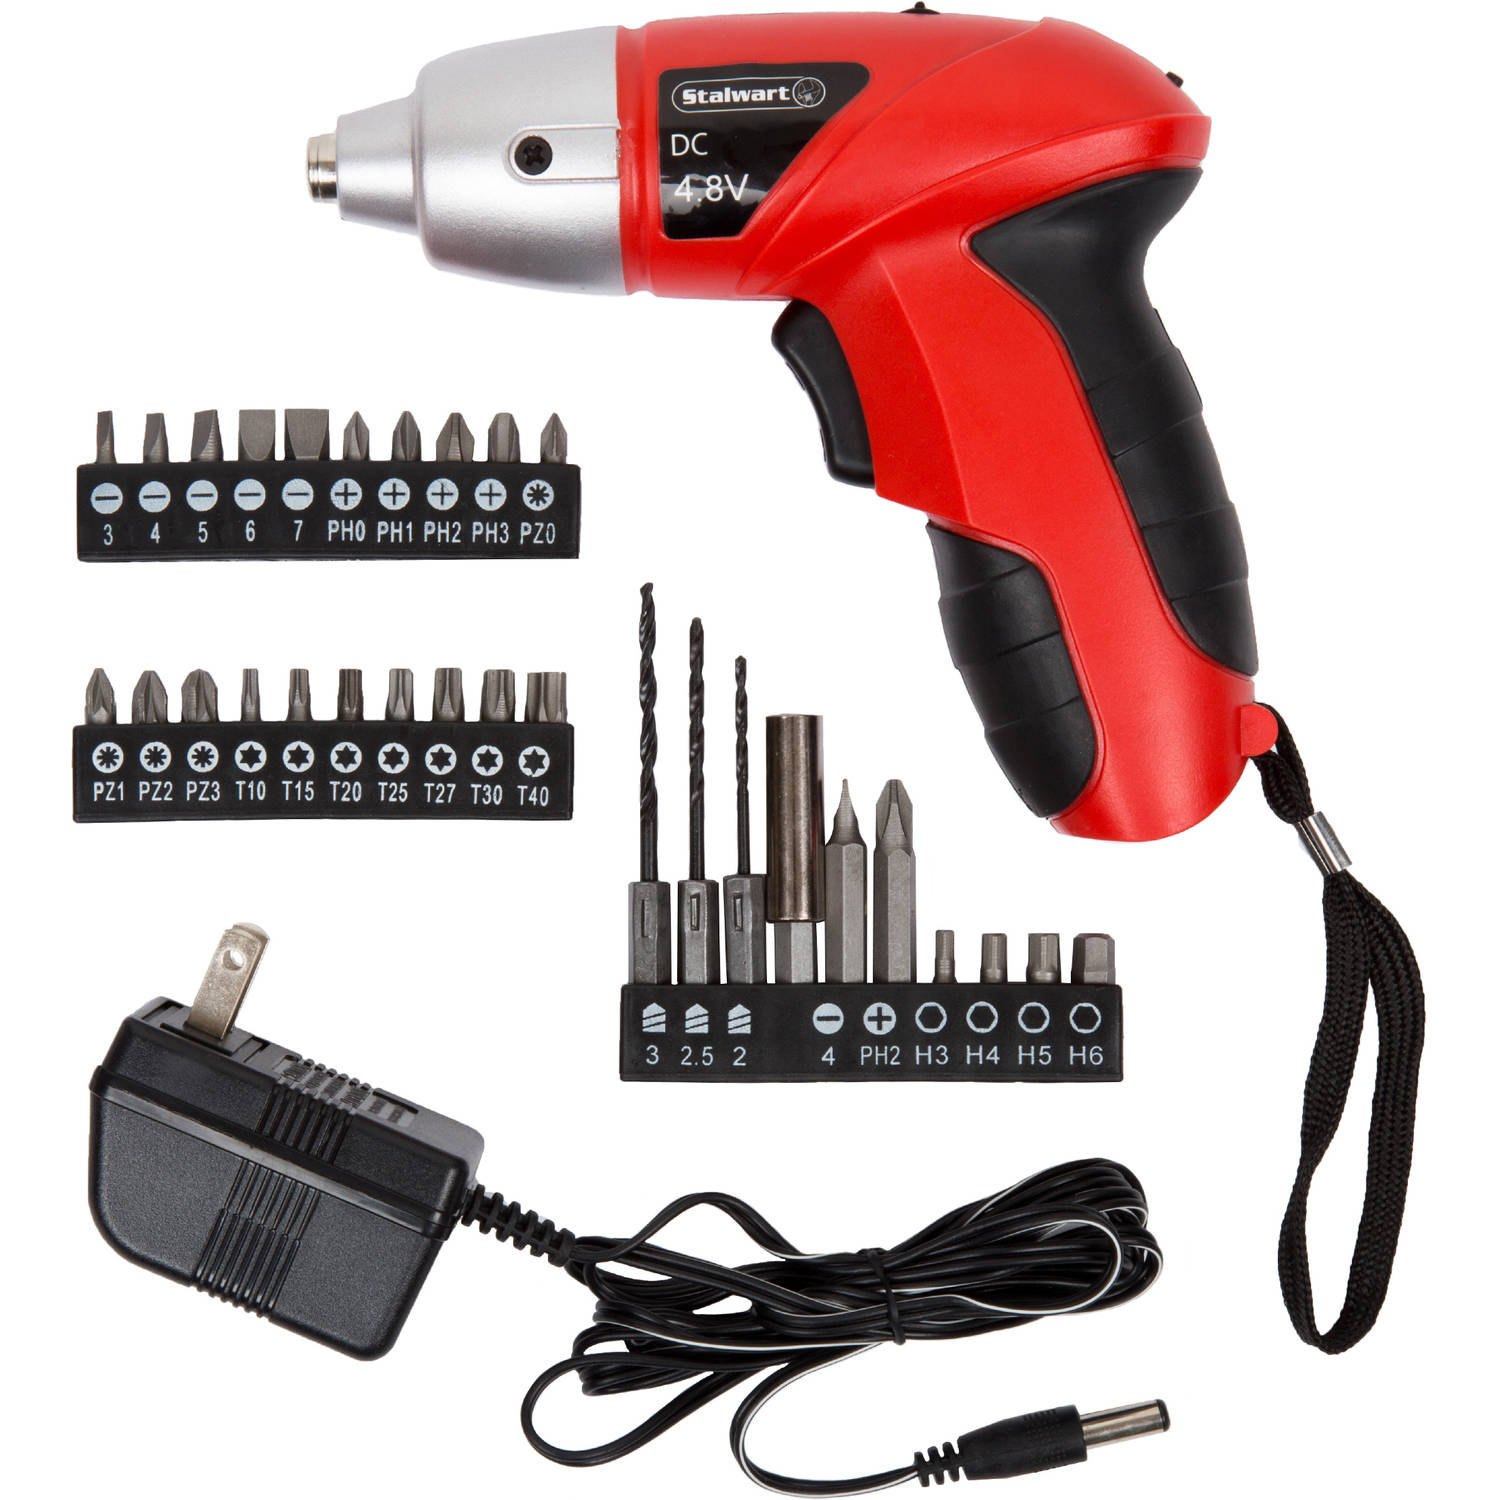 Stalwart 25-Piece Electric Cordless Screwdriver Set with Carry Case (Red) - image 1 of 3